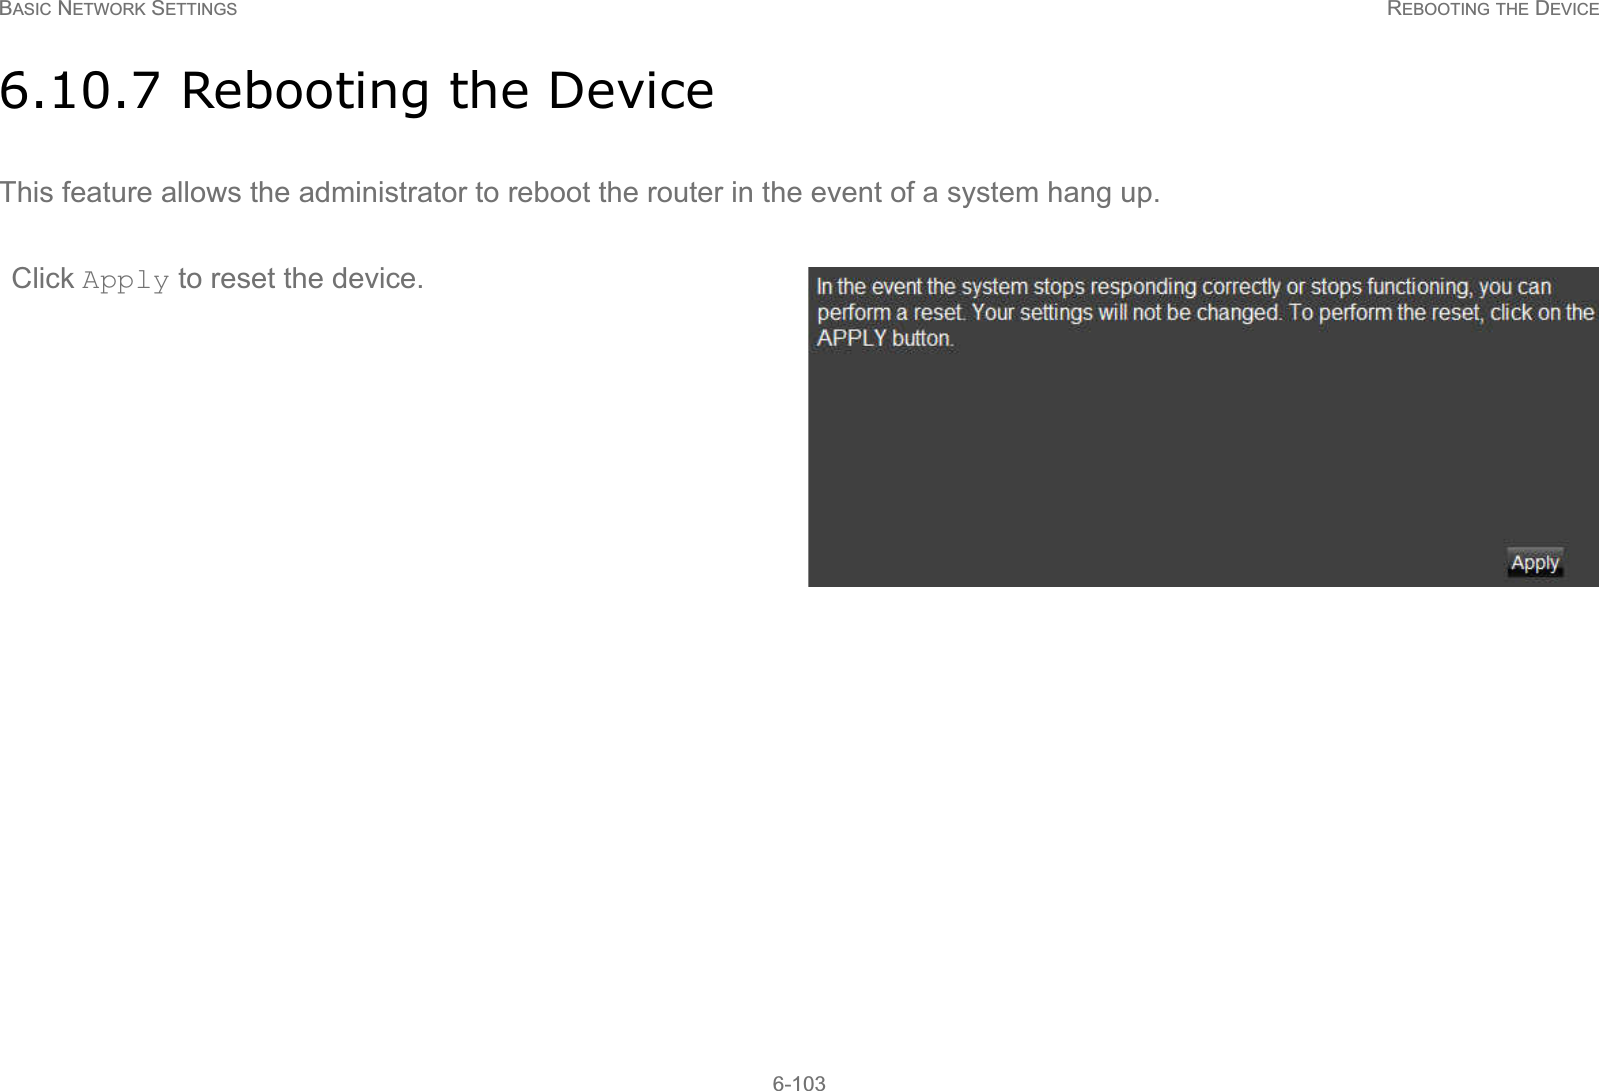 BASIC NETWORK SETTINGS REBOOTING THE DEVICE6-1036.10.7 Rebooting the DeviceThis feature allows the administrator to reboot the router in the event of a system hang up.Click Apply to reset the device.